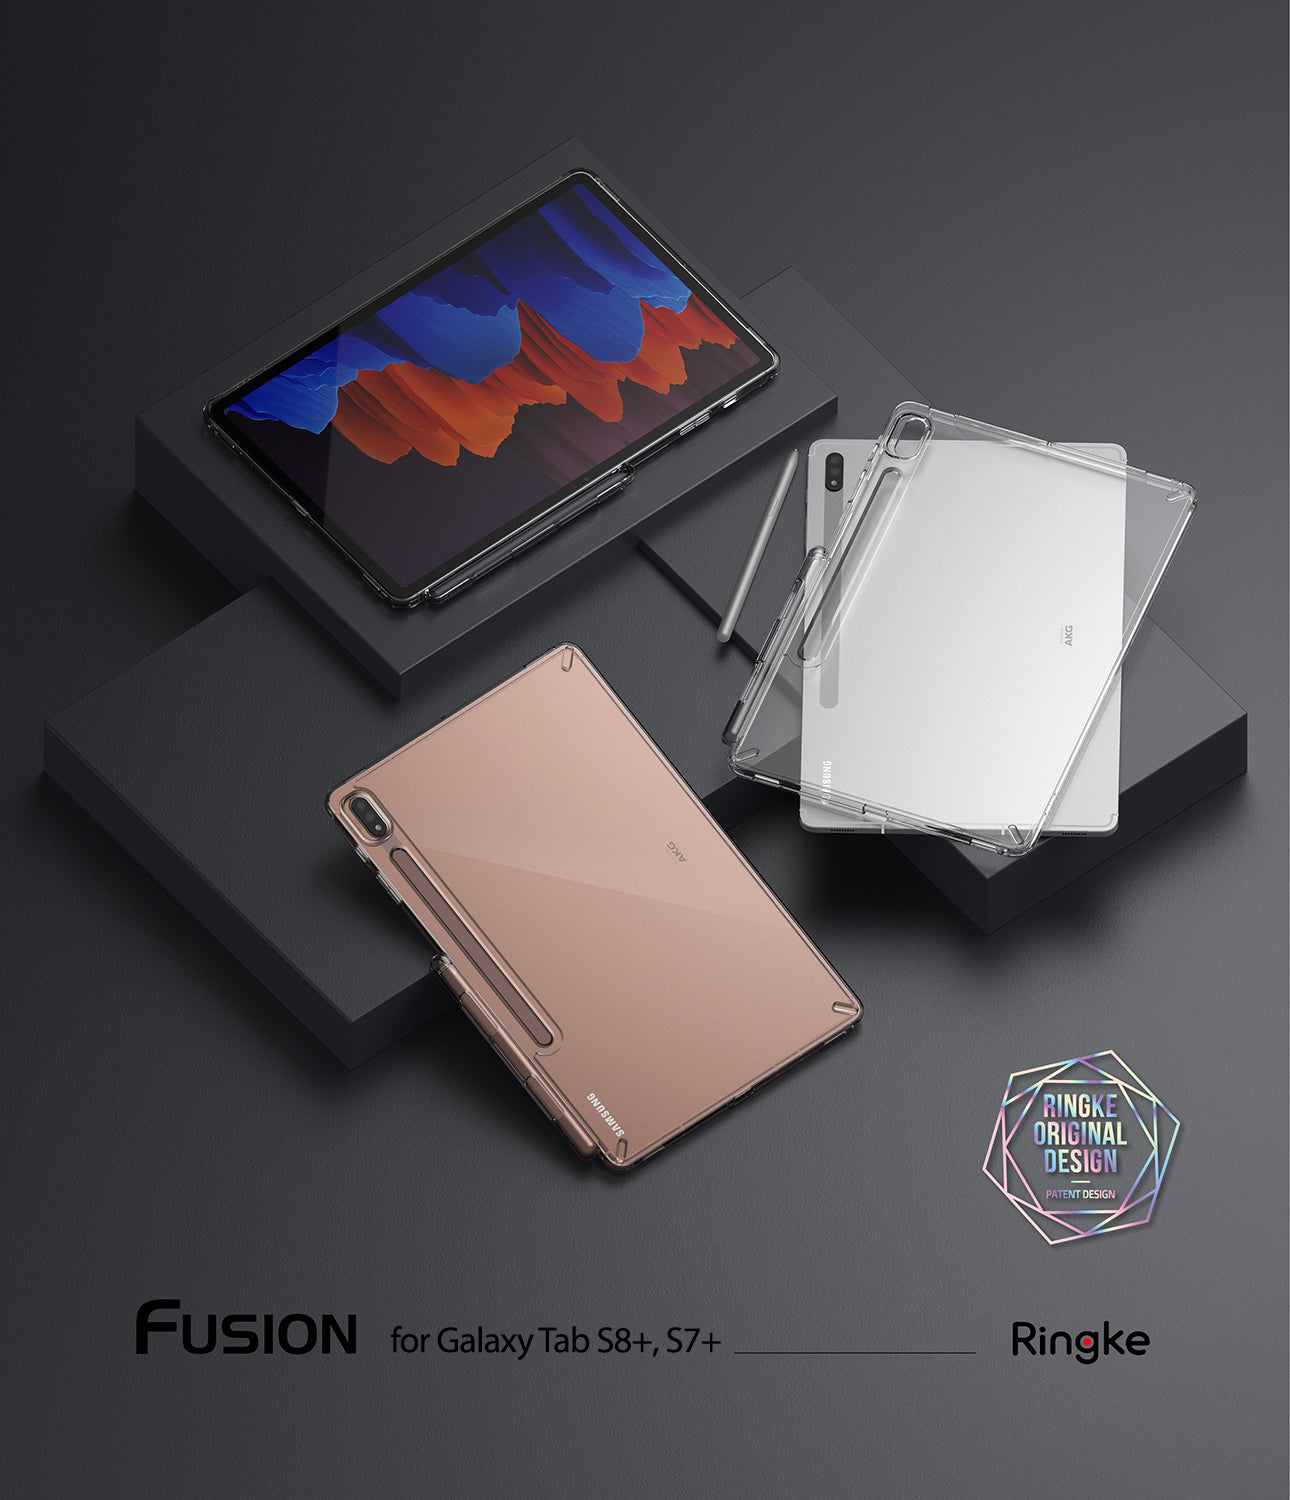 Galaxy Tab S8 Plus / Tab S7 Plus Case | Fusion - Ringke Official Store